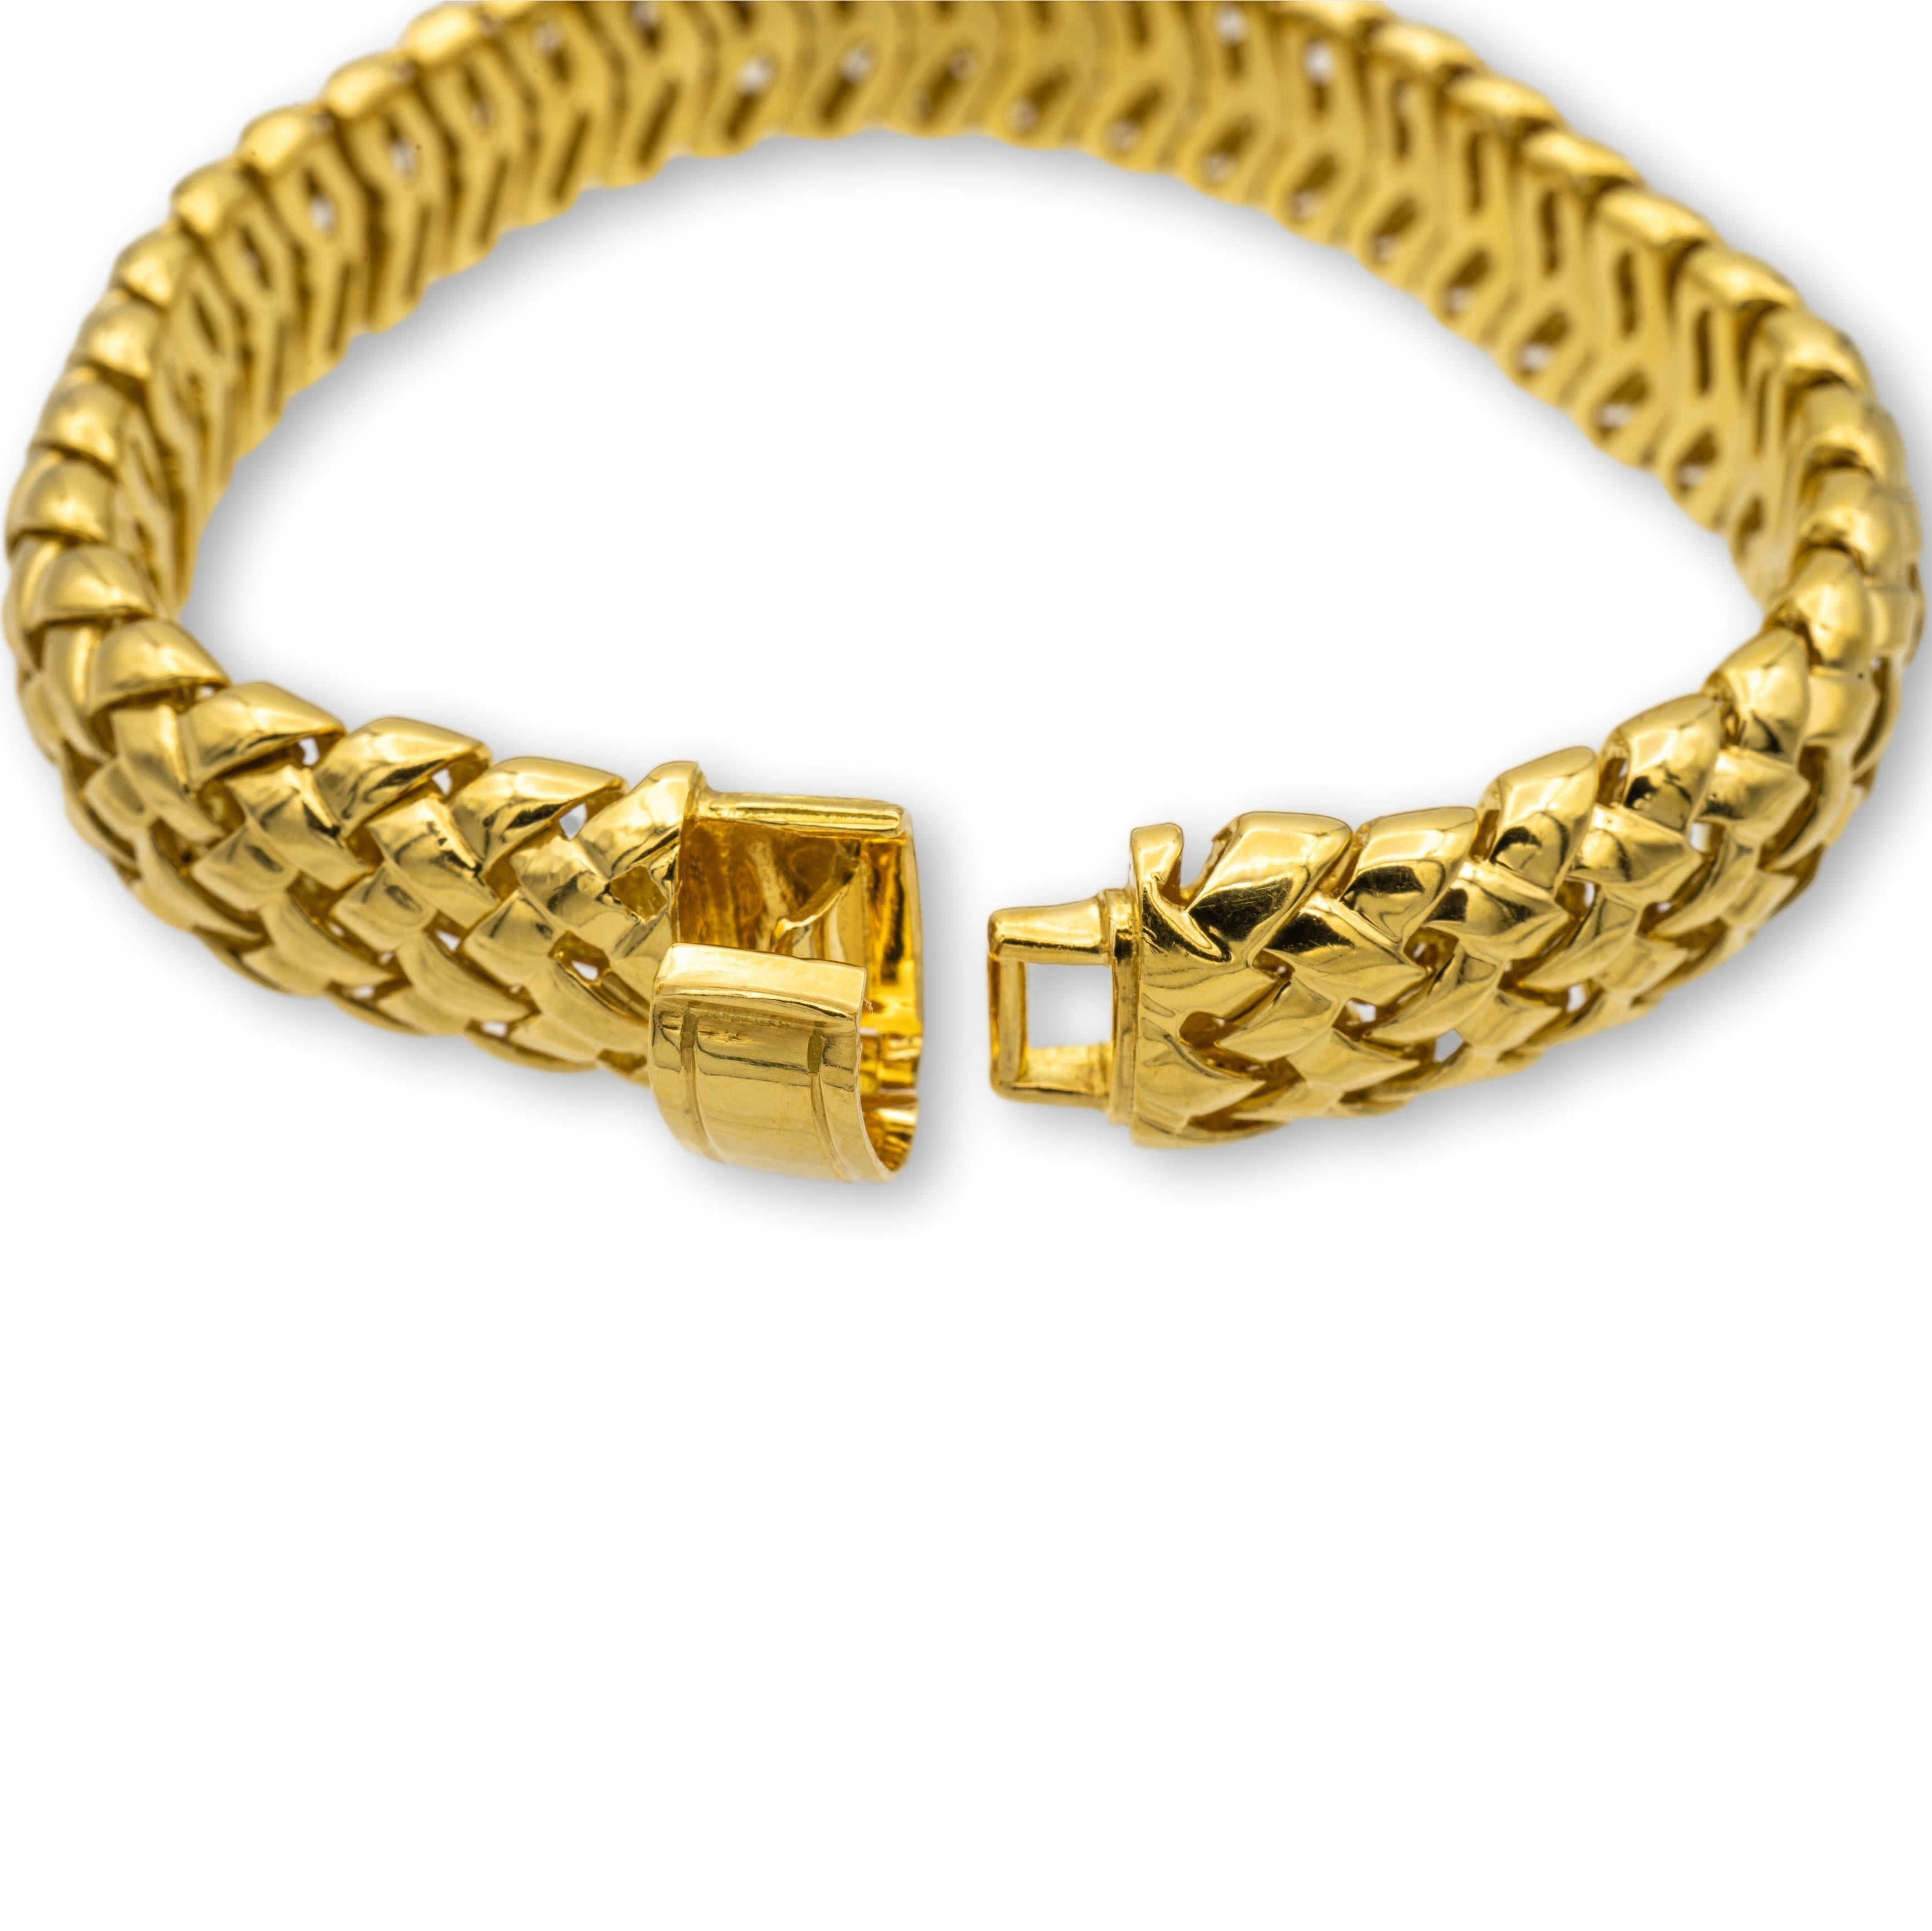 Tiffany & Co. Vintage bracelet from the Vannerie collection finely crafted in 18 Karat yellow gold in a basket weave design with a large folding snap and hook closure mechanism. 

Matching necklace and earrings available.

BRACELET